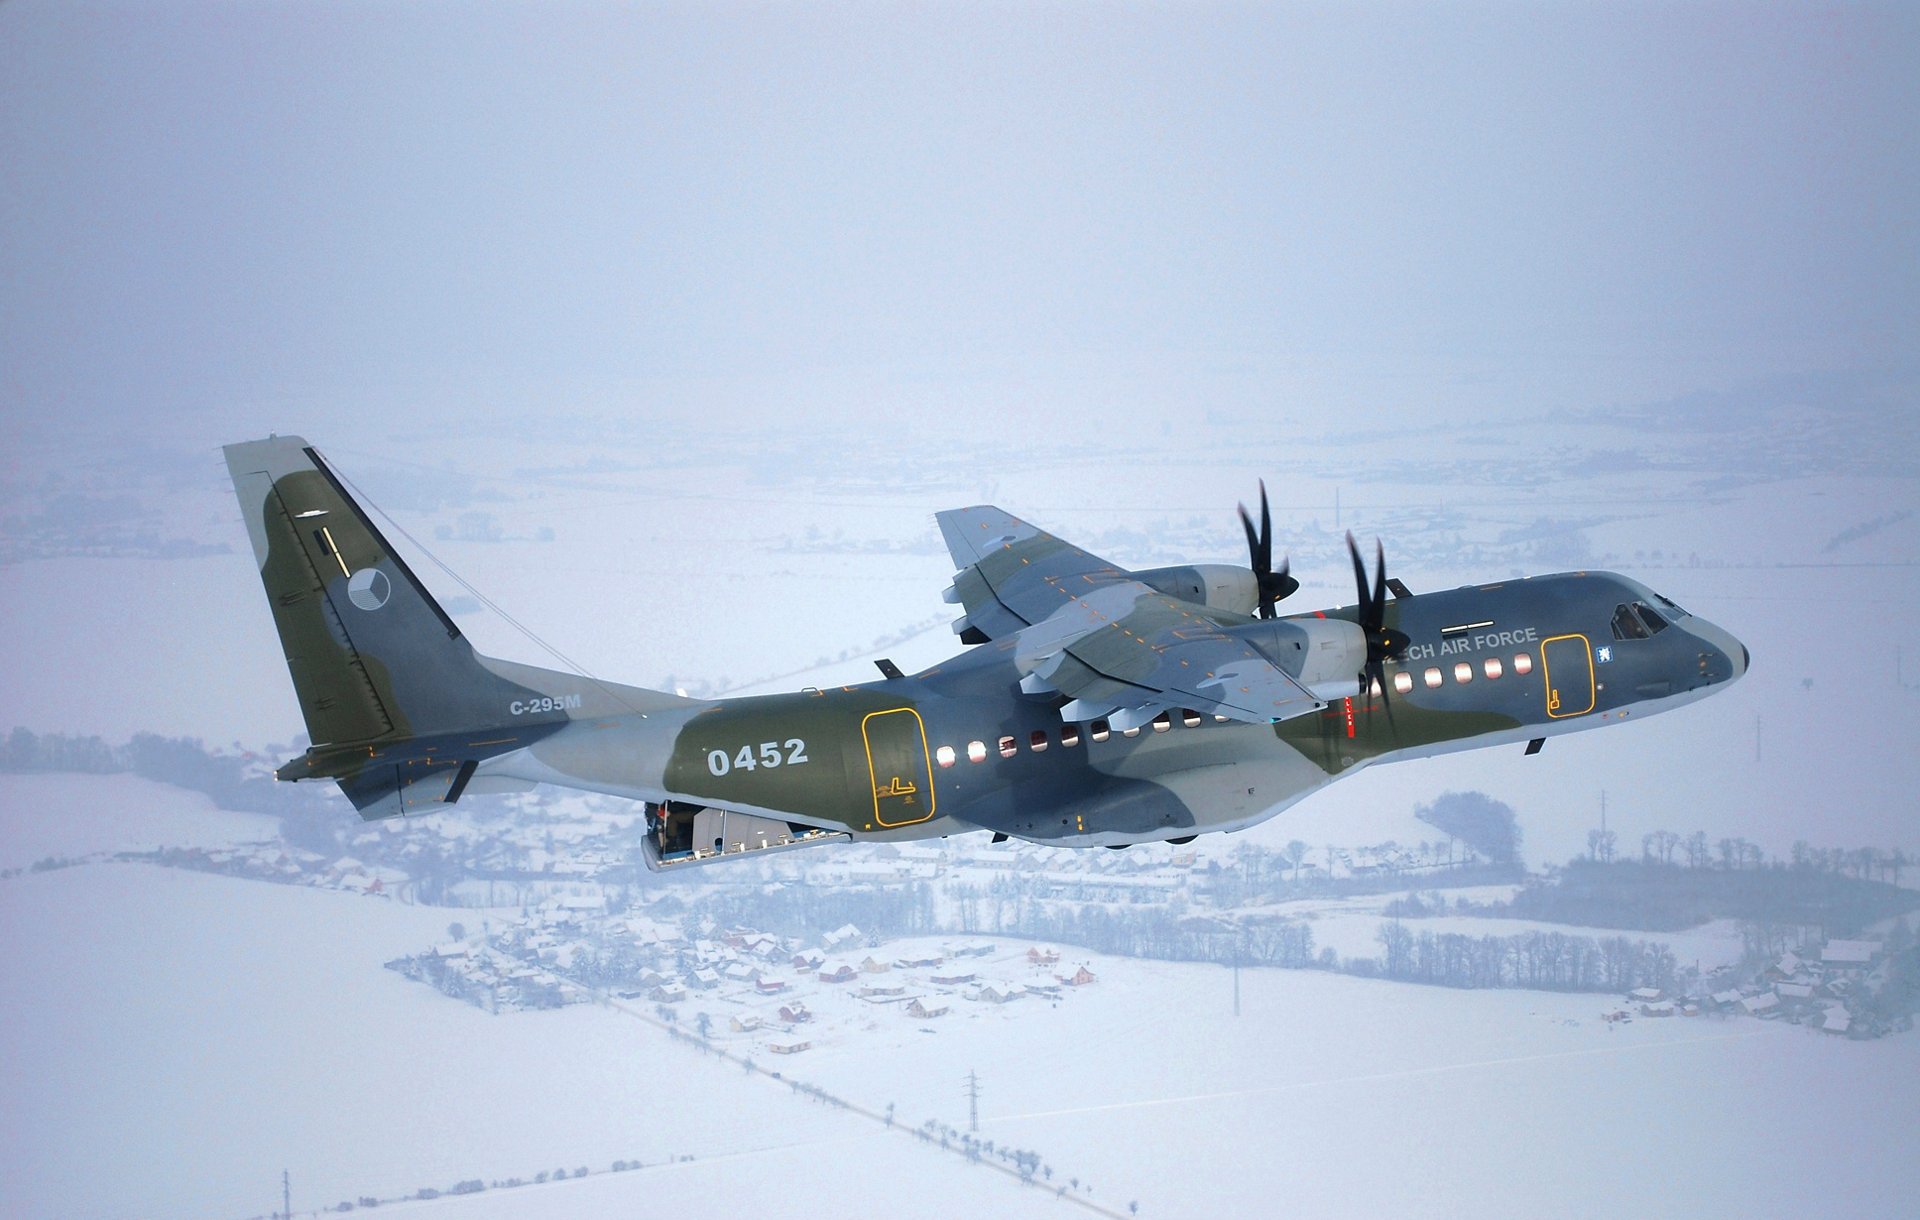 Czech Air Force's Airbus C295 medium airlifter in flight. The aircraft is equipped with winglets in transport configuration.